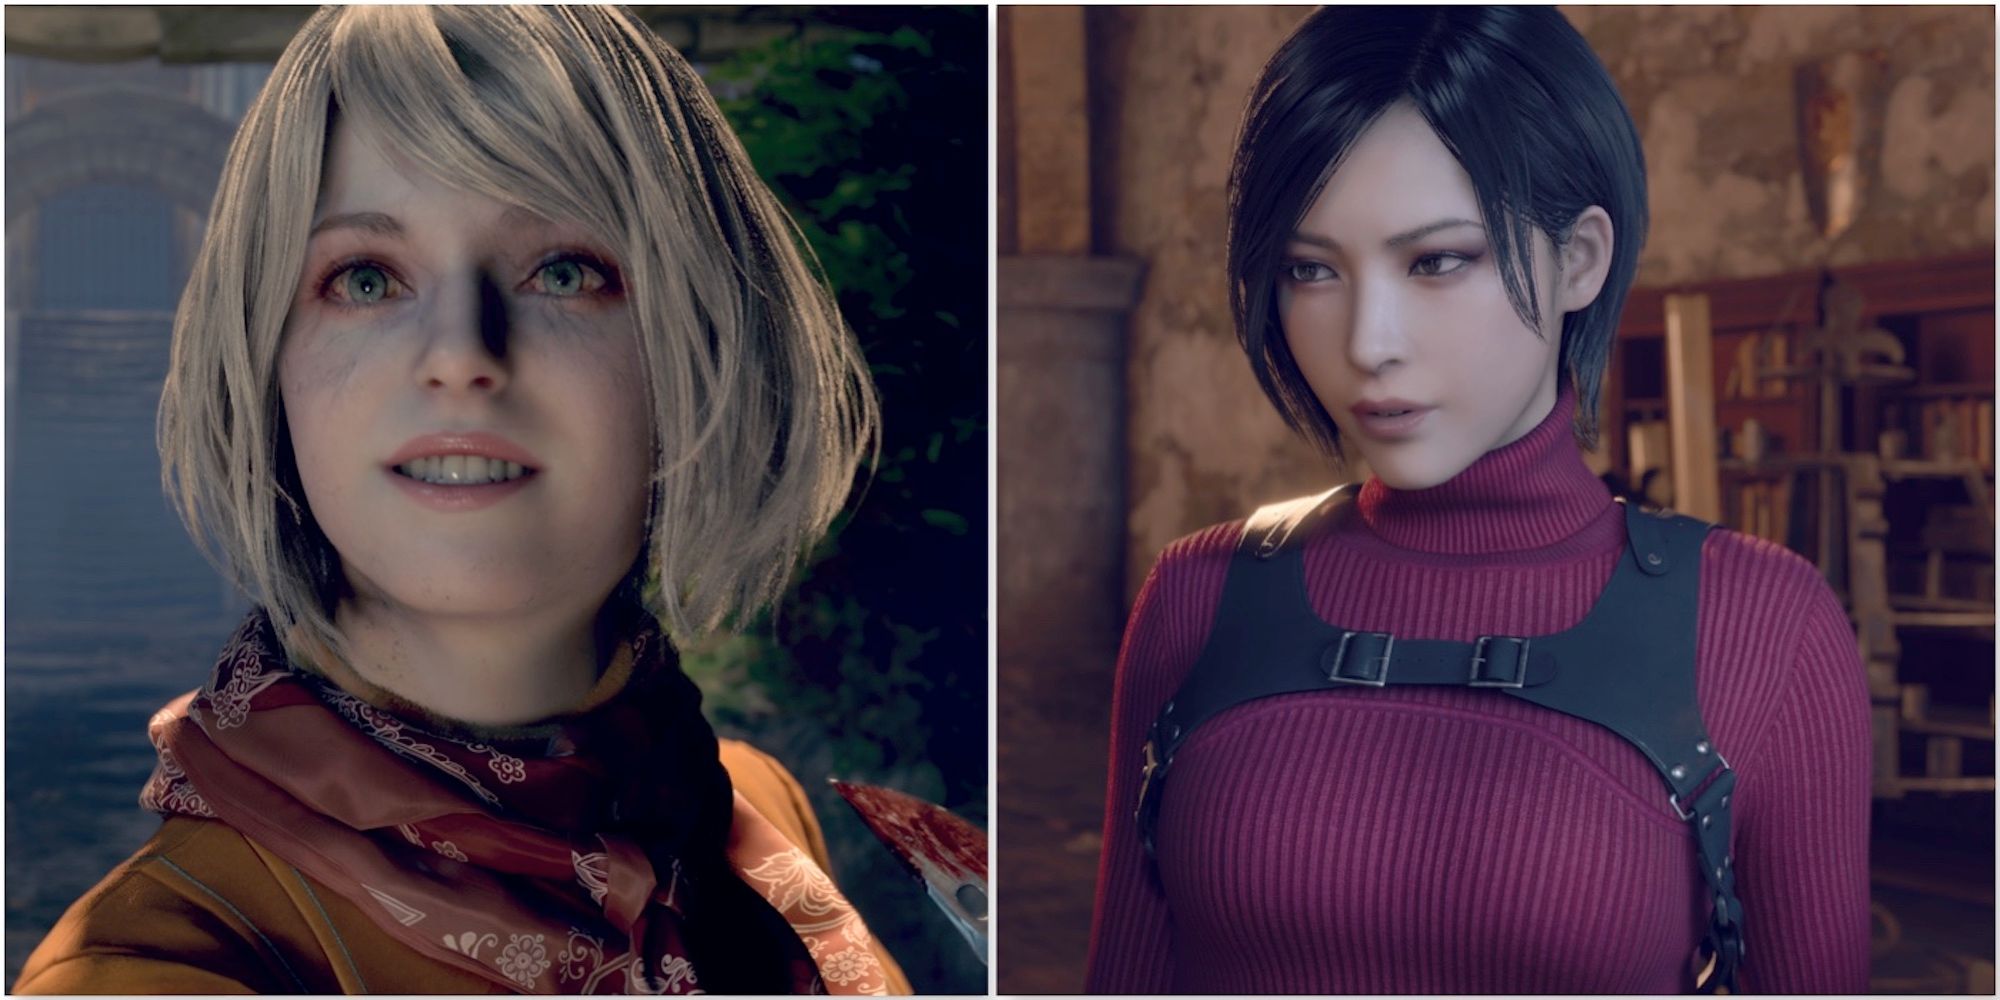 Ashley and Ada in the Resident Evil 4 remake